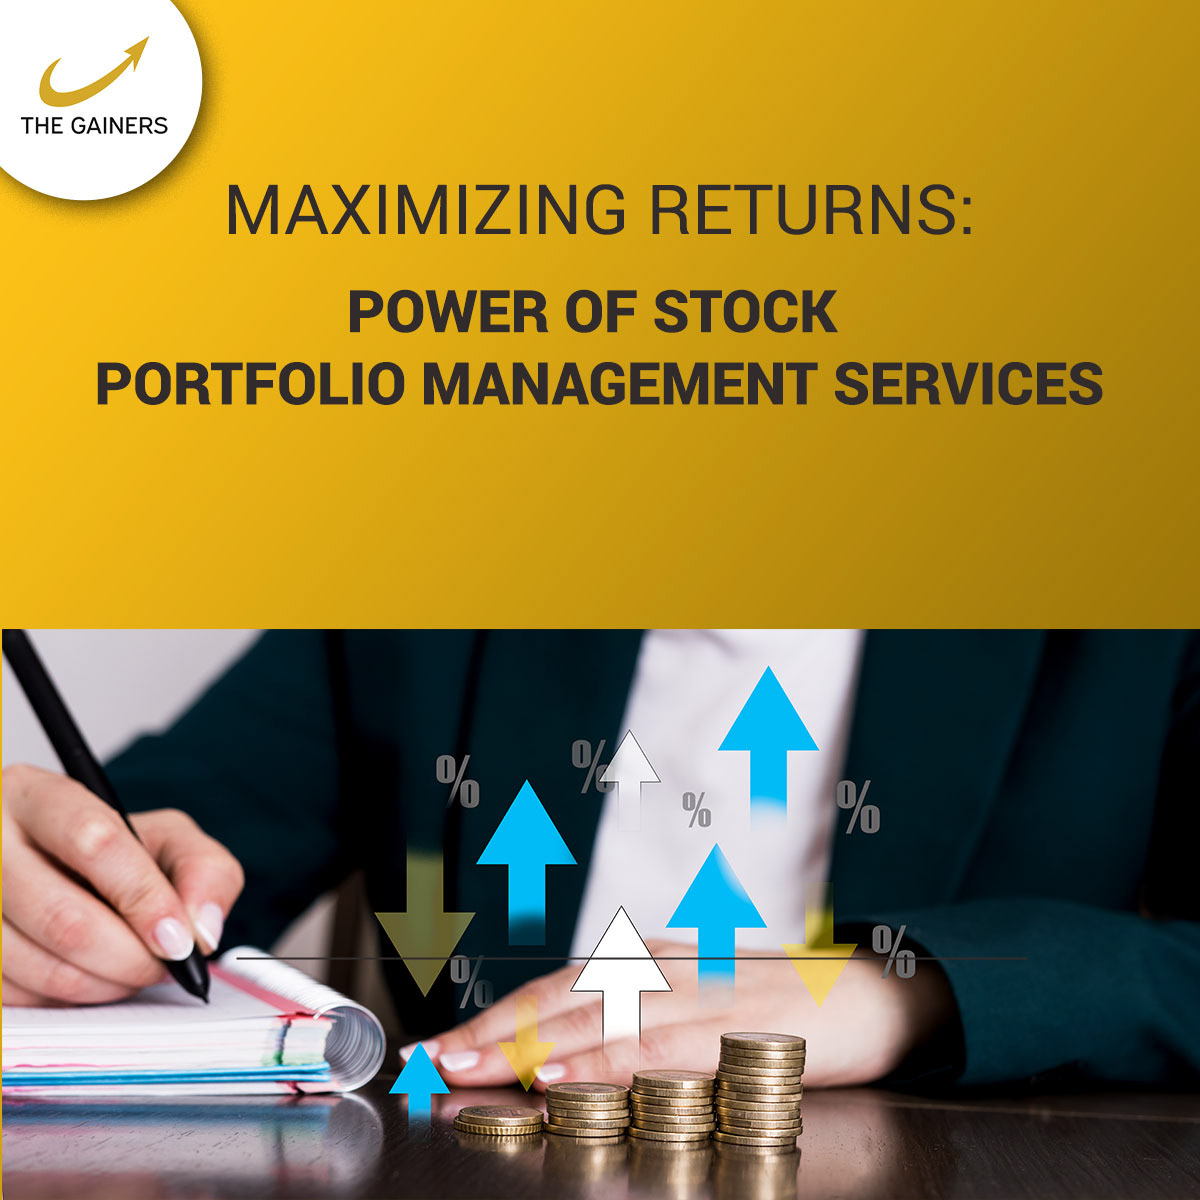 Investment Portfolio Stock market Mutual Funds wealth management financial consultant Sip pms in india